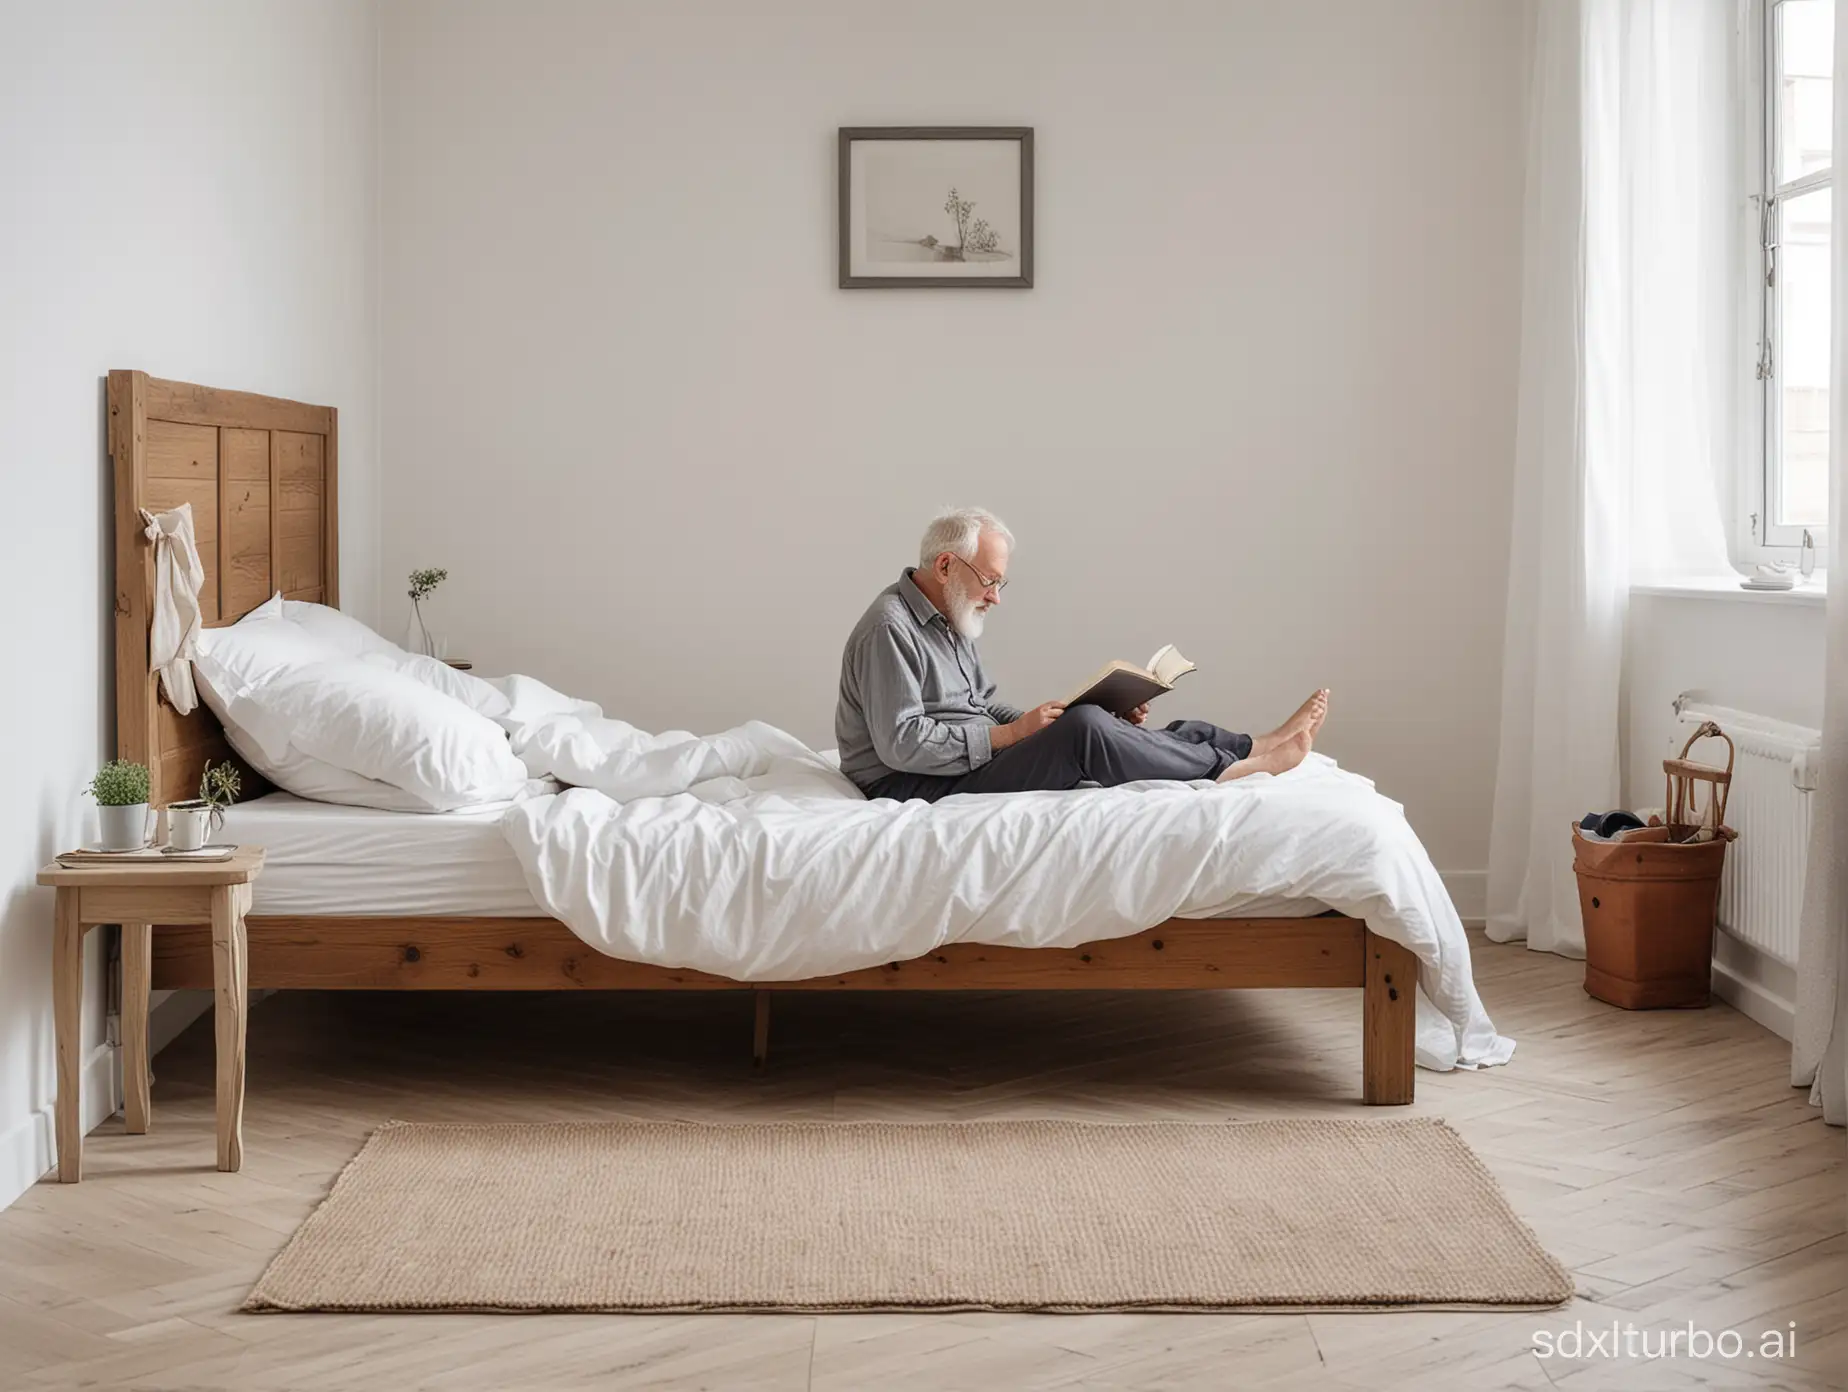 Side view, in a bright North European bedroom, a little higher bed, an old man lying on the bed reading, revealing the bed and the floor